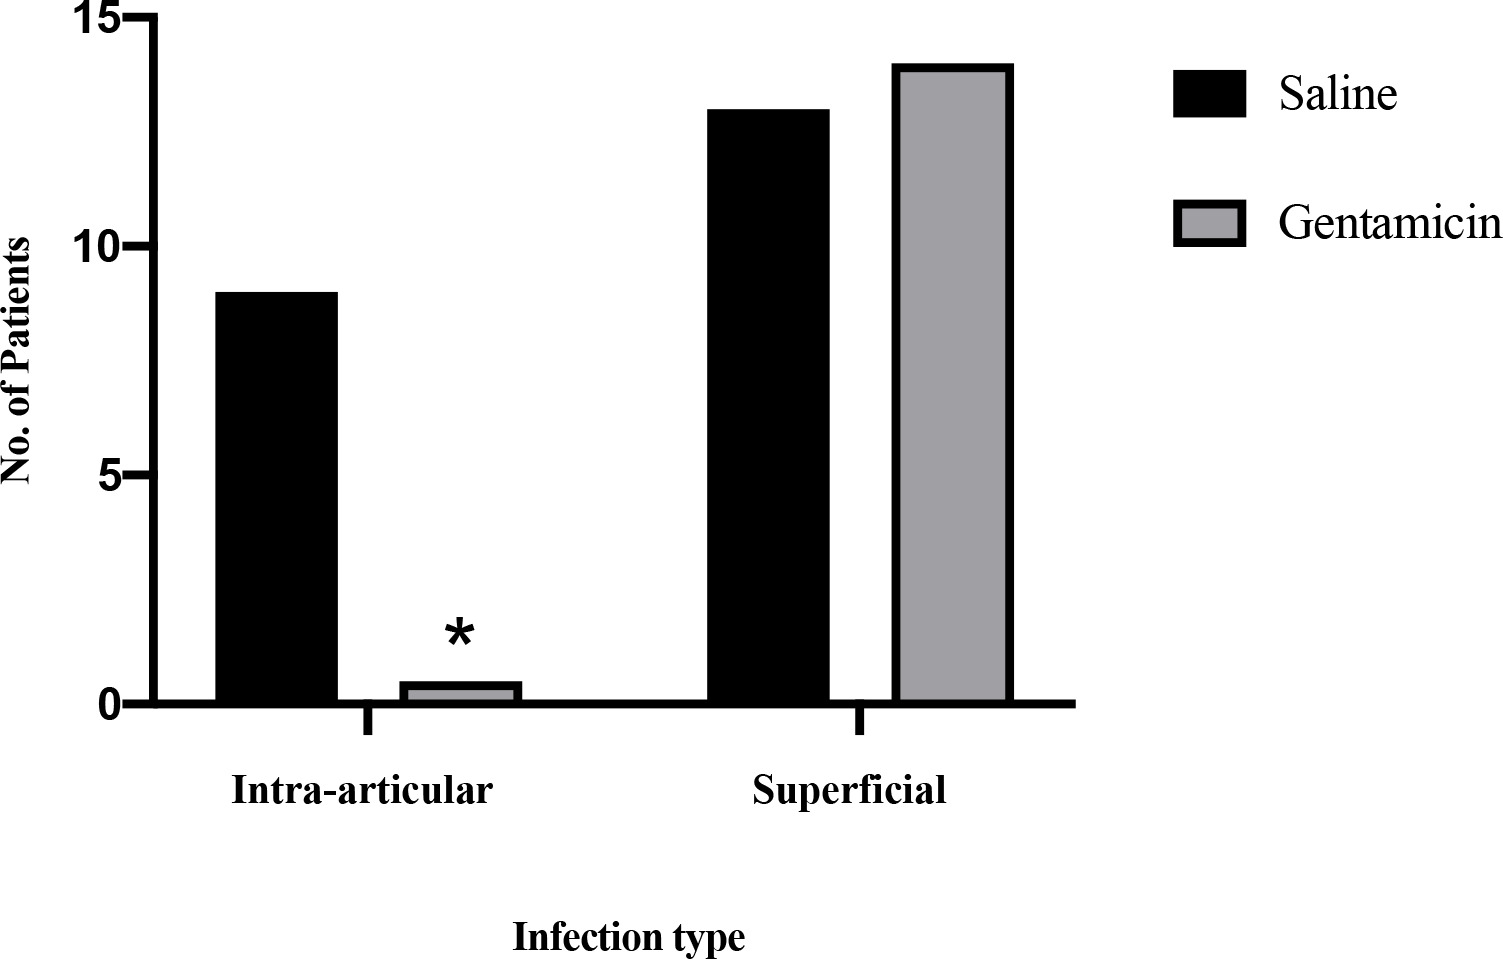 Fig. 1 
            Intra-articular and superficial infections post anterior cruciate ligament reconstruction. *There was a significantly higher rate of intra-articular infection in the saline group compared to the gentamicin group (p = 0.004, chi-squared test).
          